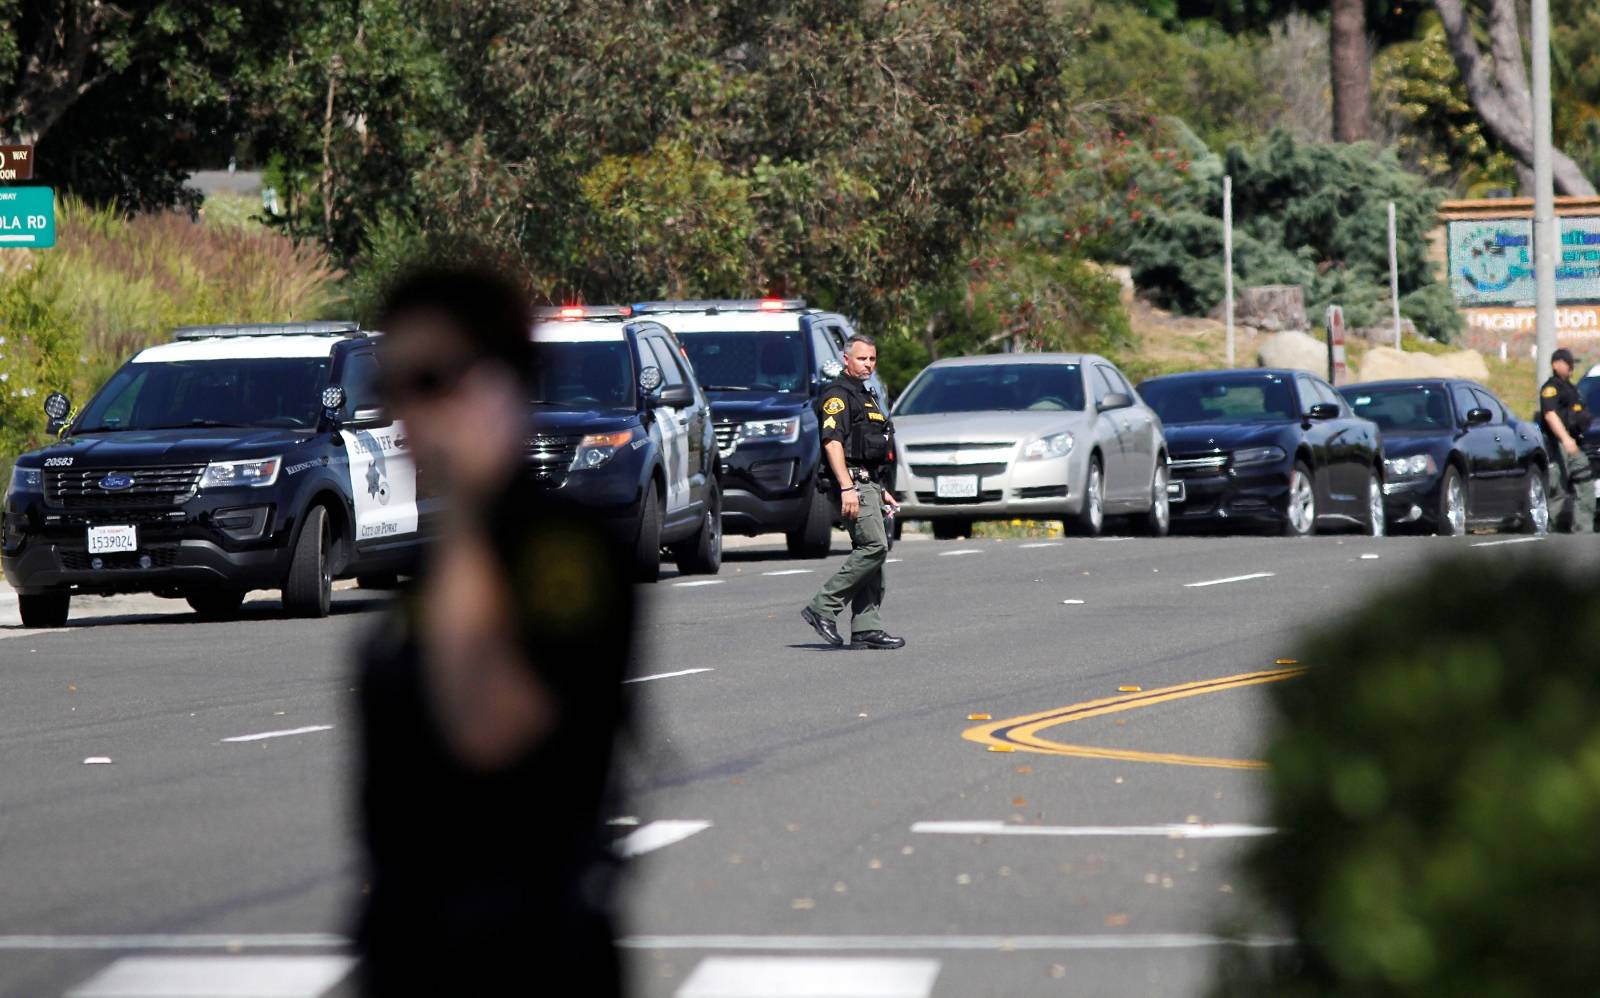 Police secure the scene of a shooting incident at the Congregation Chabad synagogue in Poway